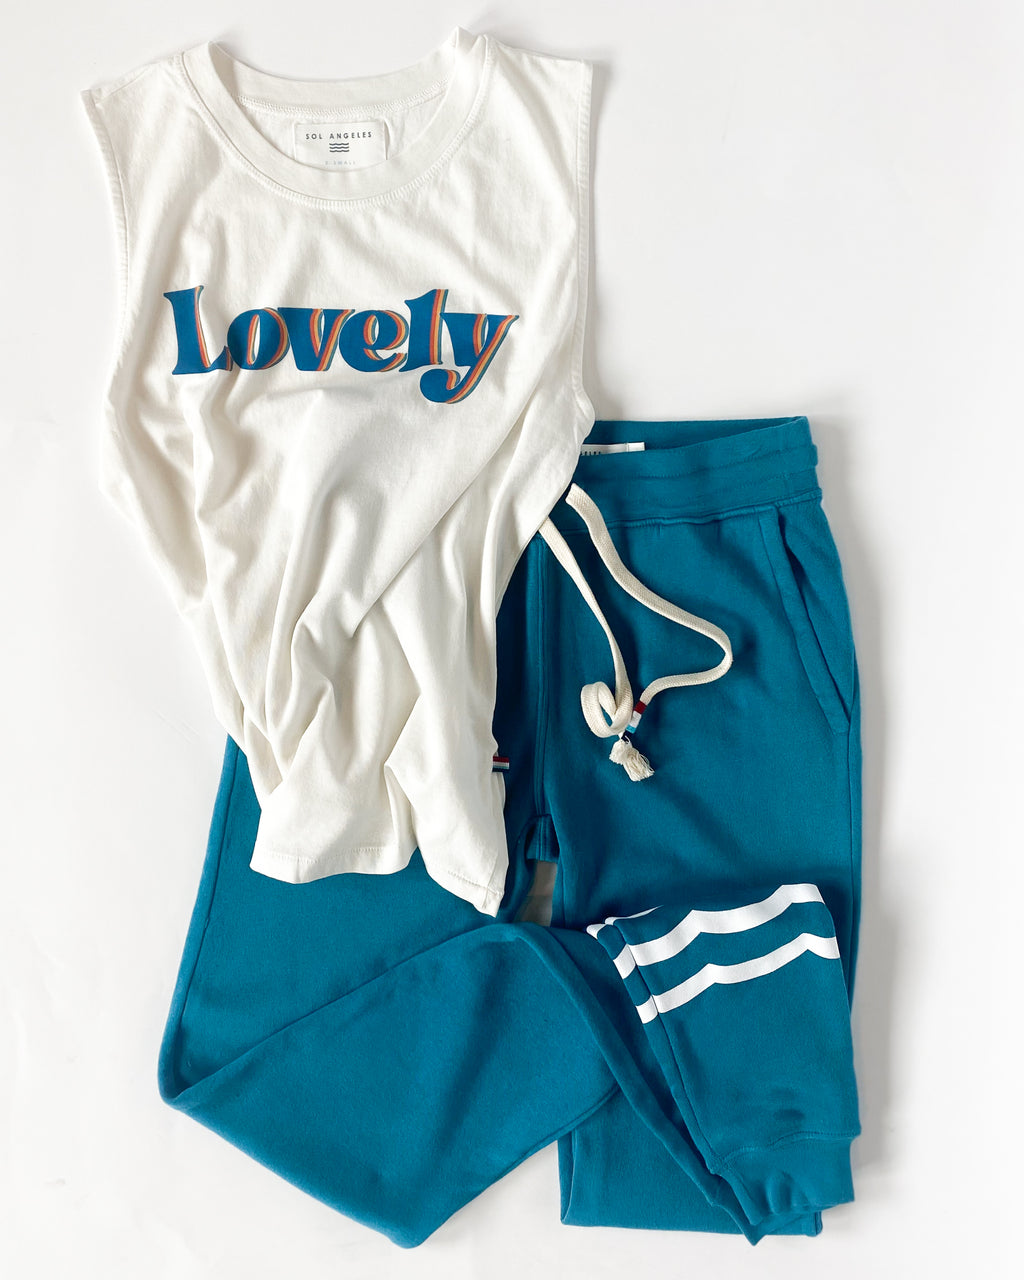 "Lovely" Cotton Muscle Tank